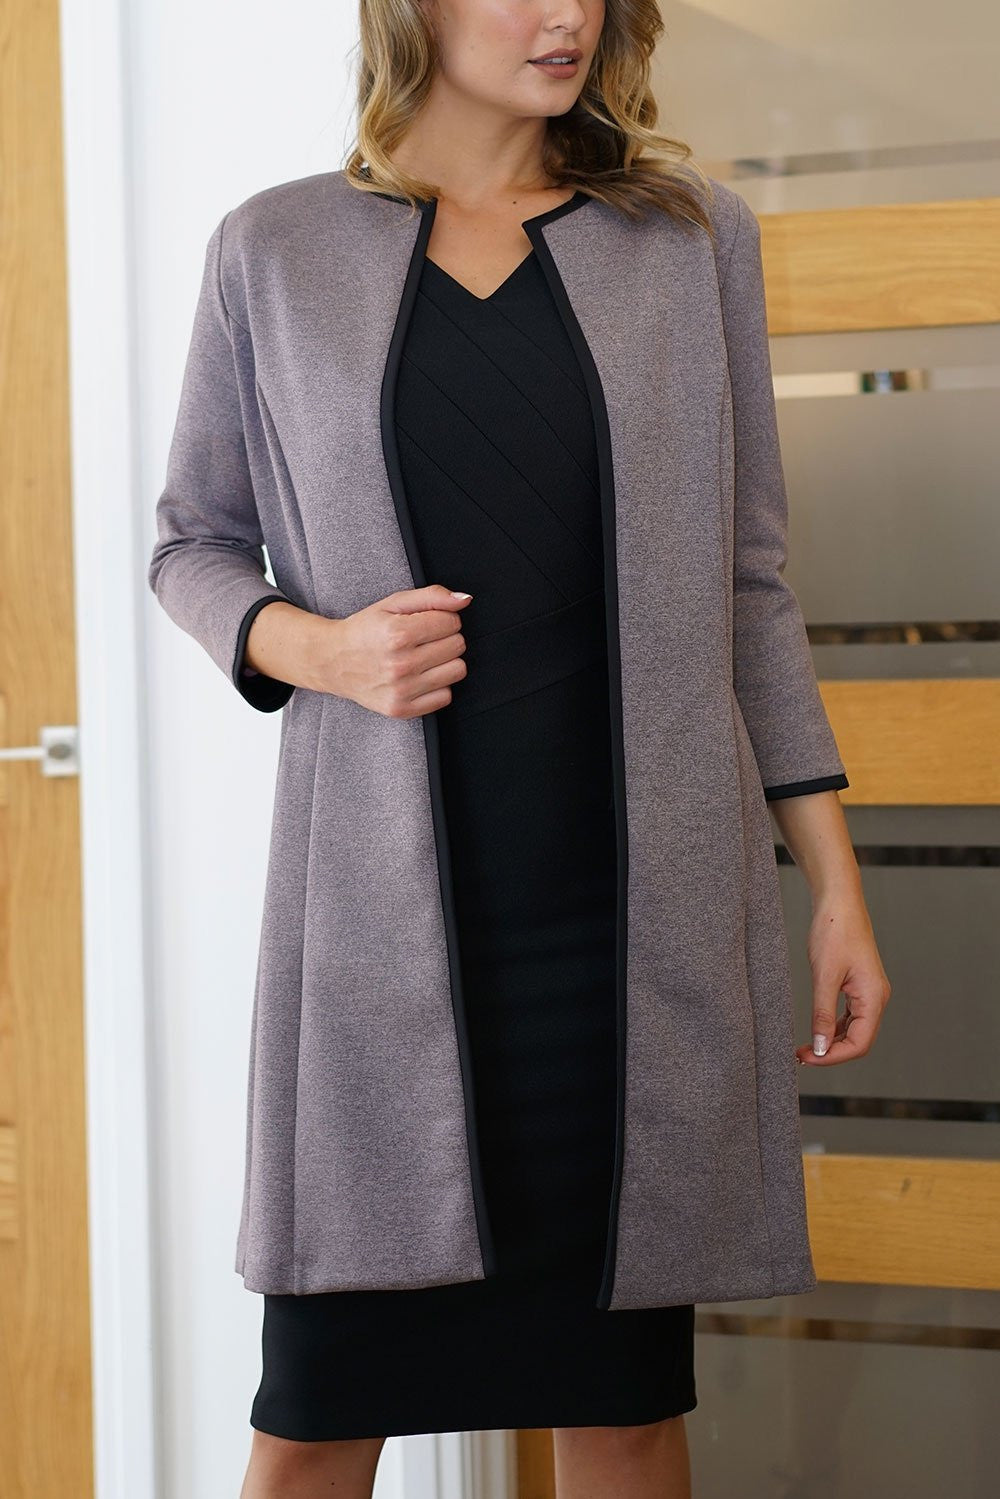 Model wearing the Diva Alverstone Coat in Mist Pink and black front image    